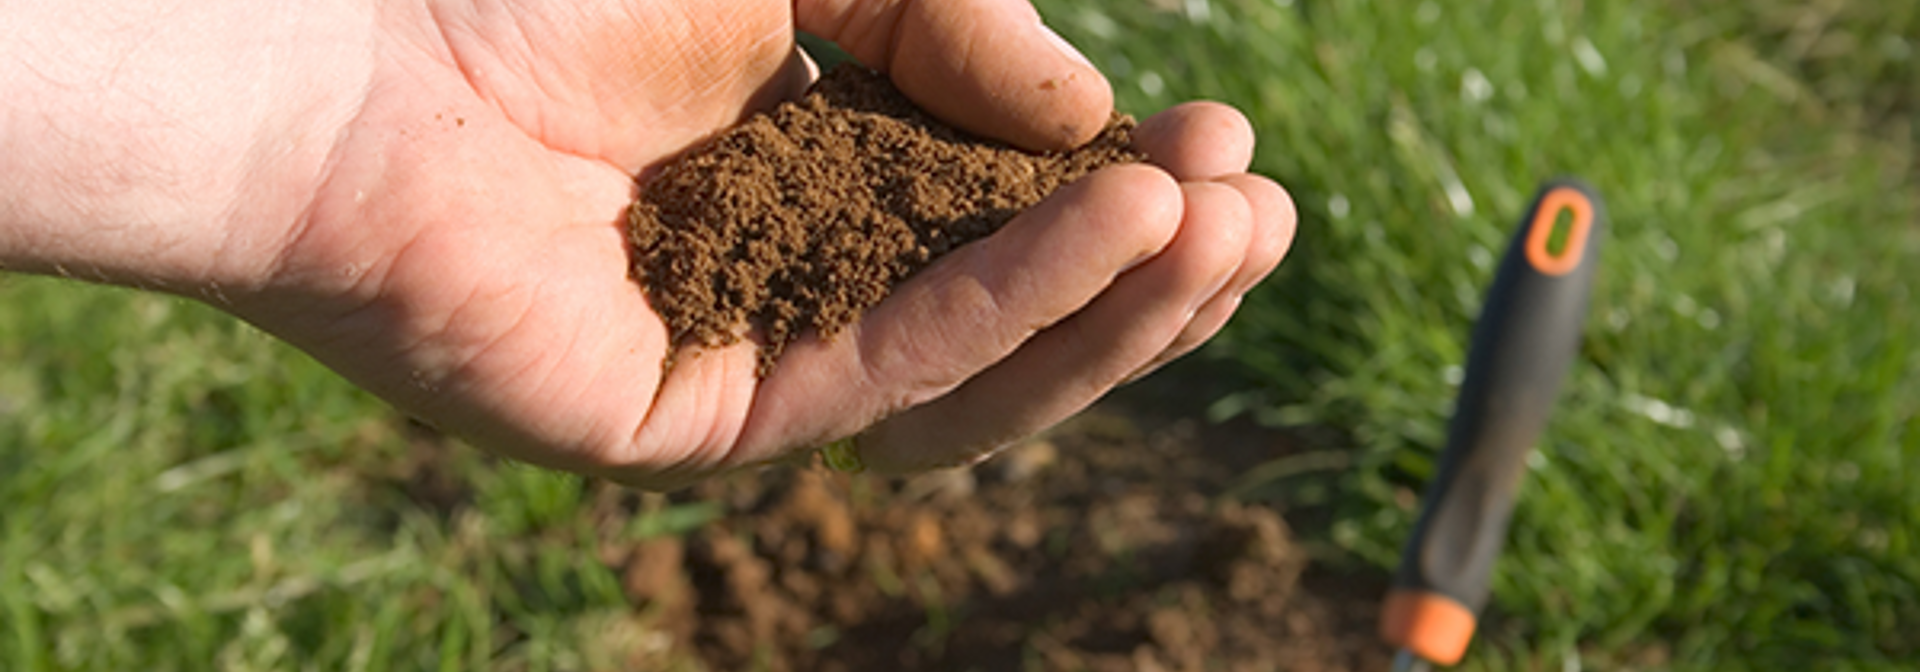 Soil Test Is Your Soil Compacted